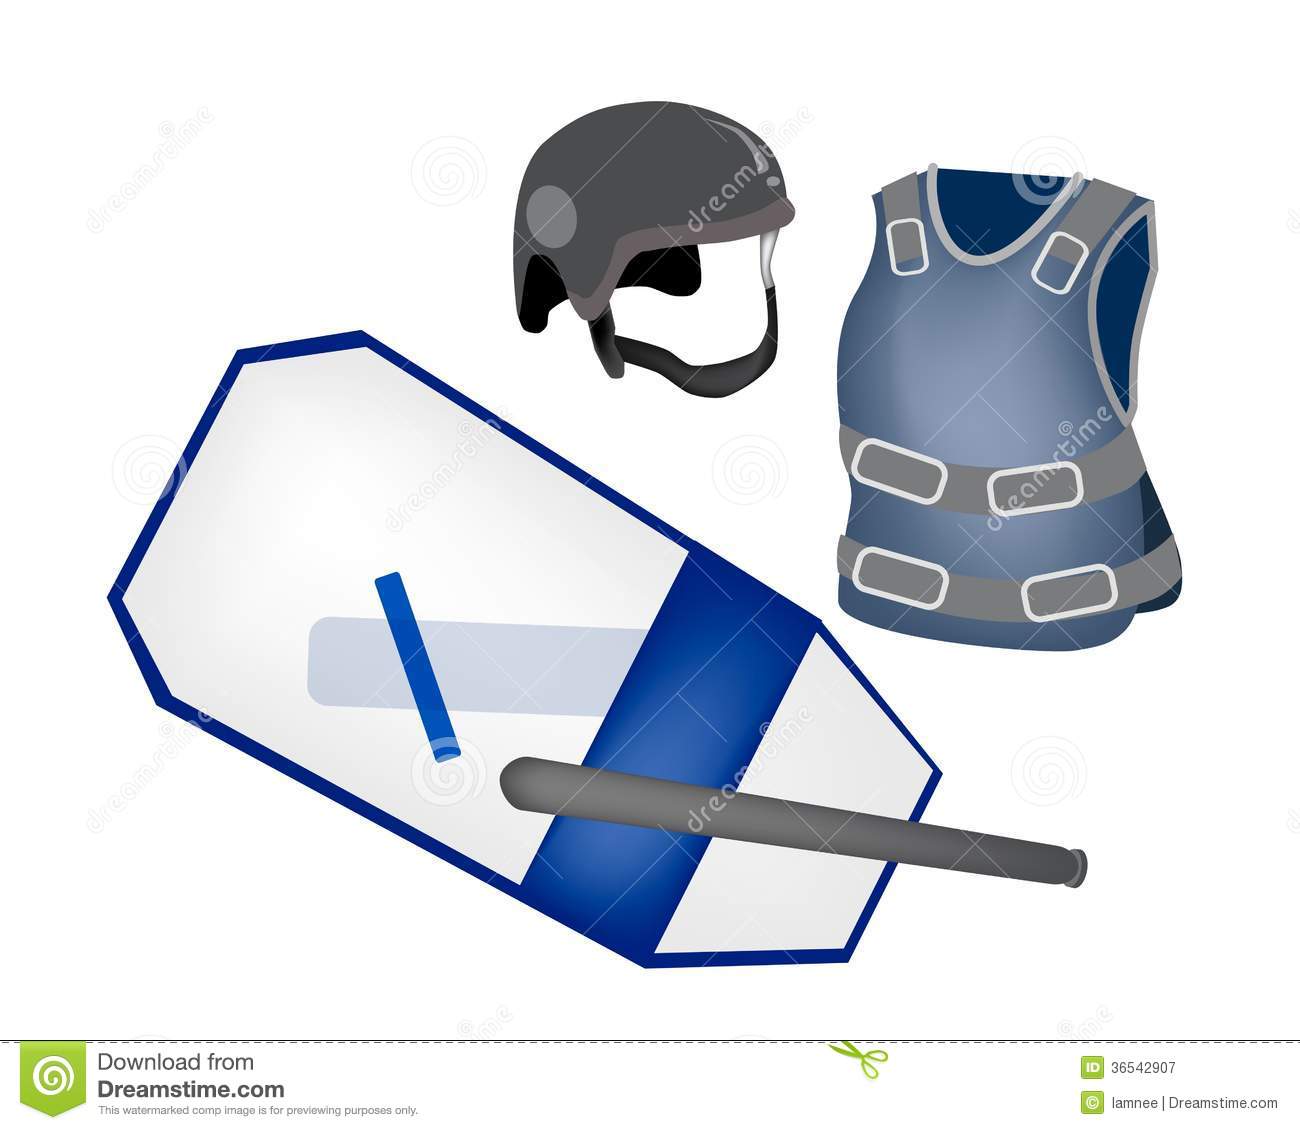 Police Equipment And Police Uniform On White Backg Royalty Free Stock